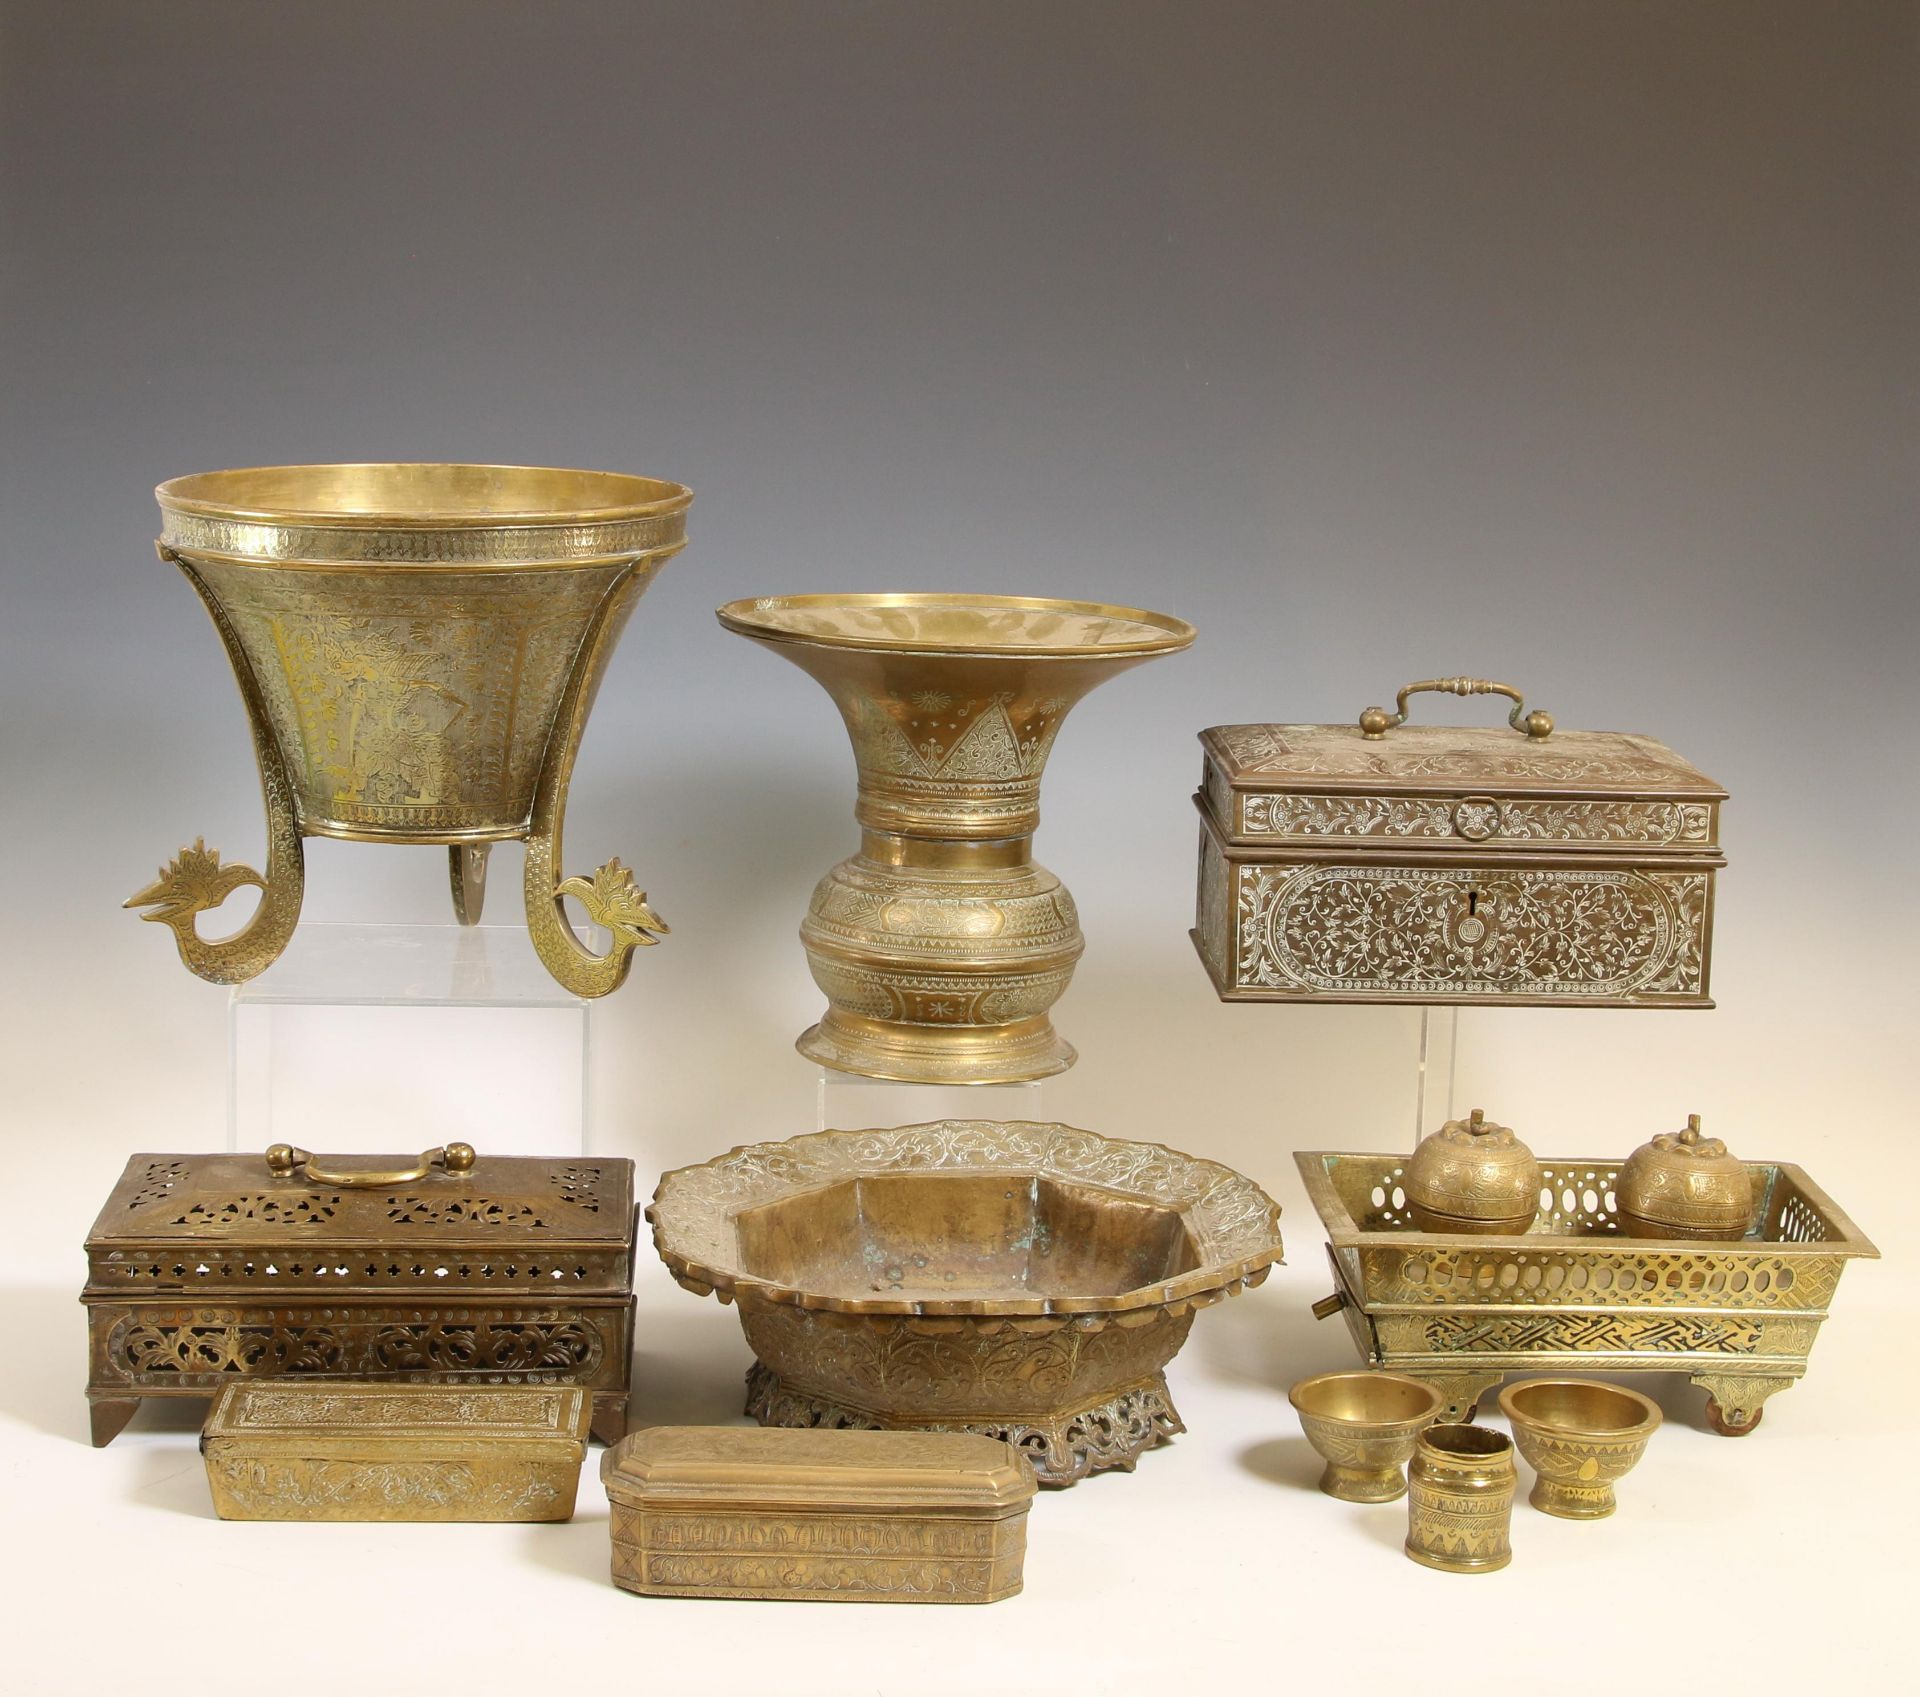 Sumatra-Java, a collection of copper alloy boxes and offering bowls;